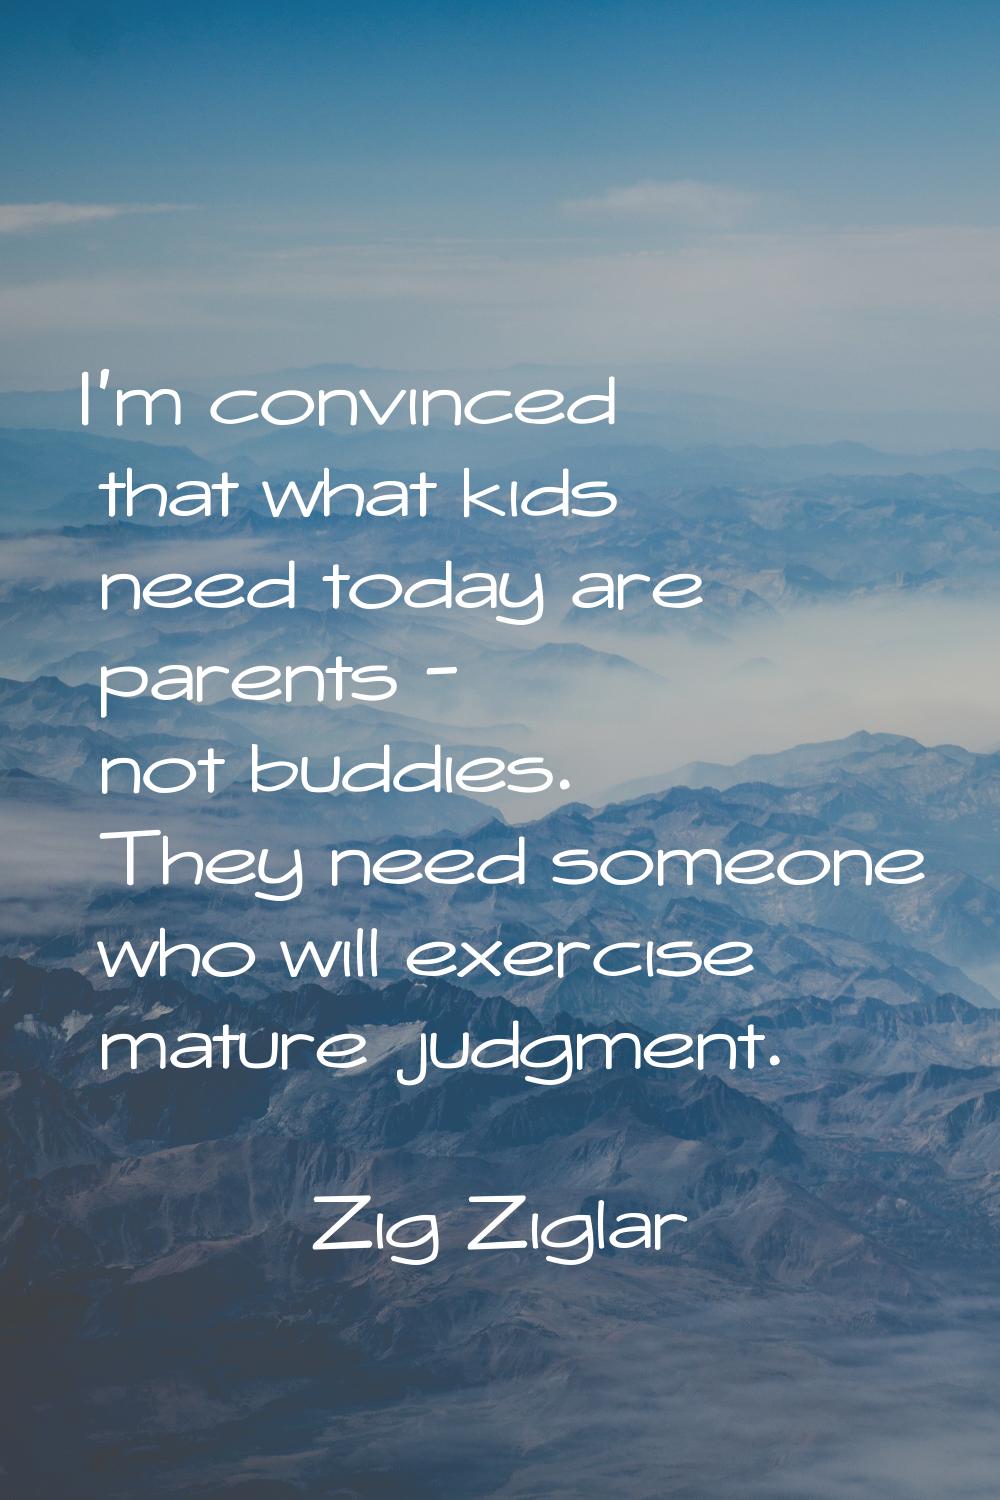 I'm convinced that what kids need today are parents - not buddies. They need someone who will exerc